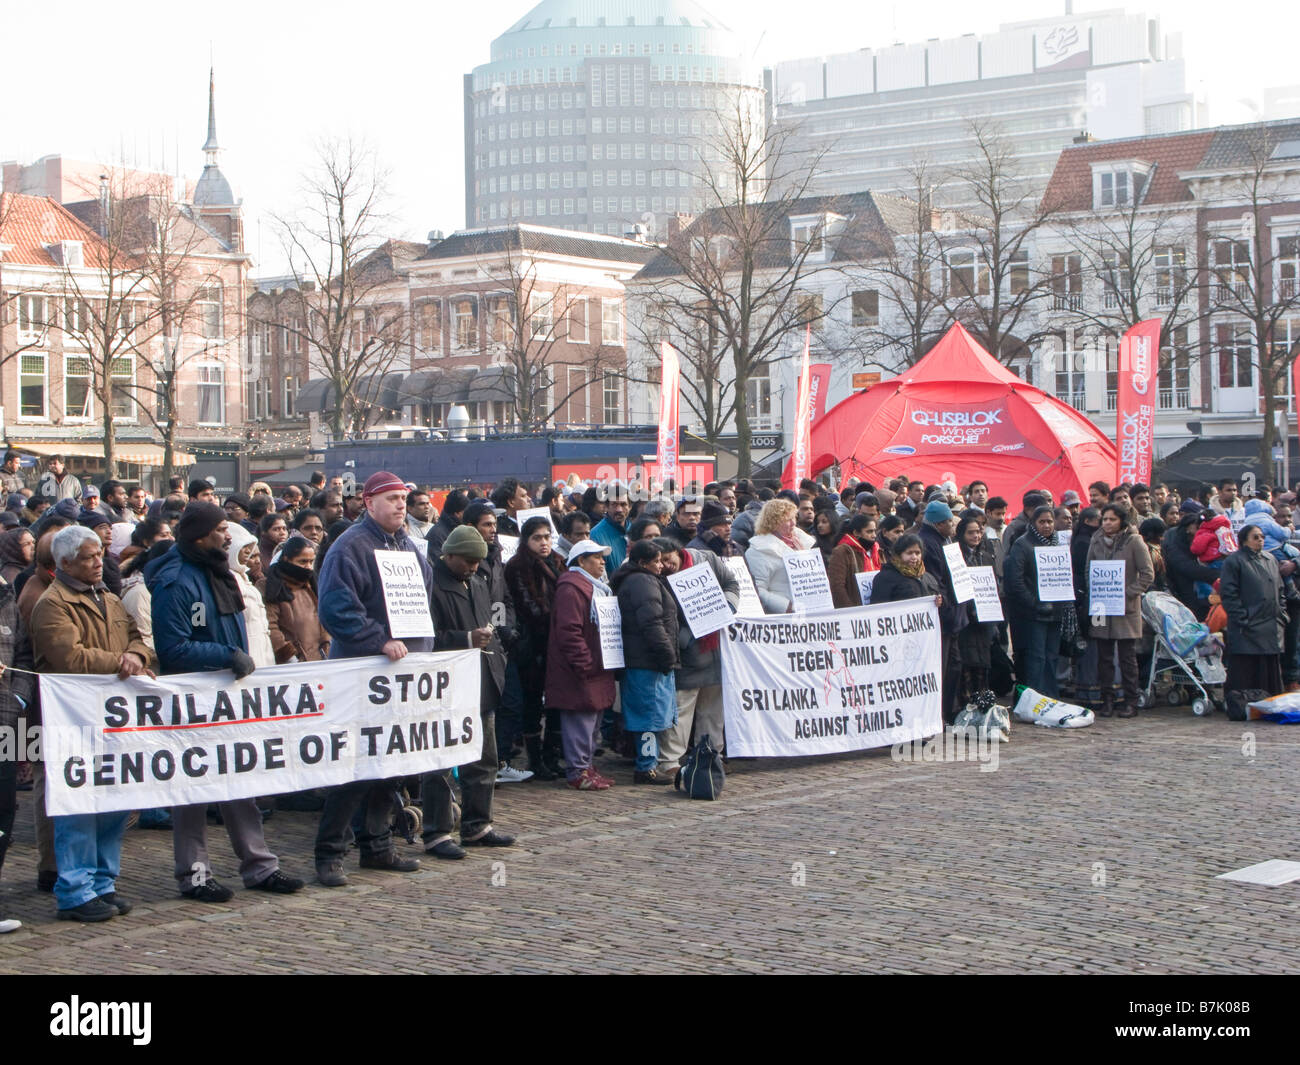 Protest demonstration against government of Sri Lanka war with Tamils, The Hague, Netherlands Stock Photo